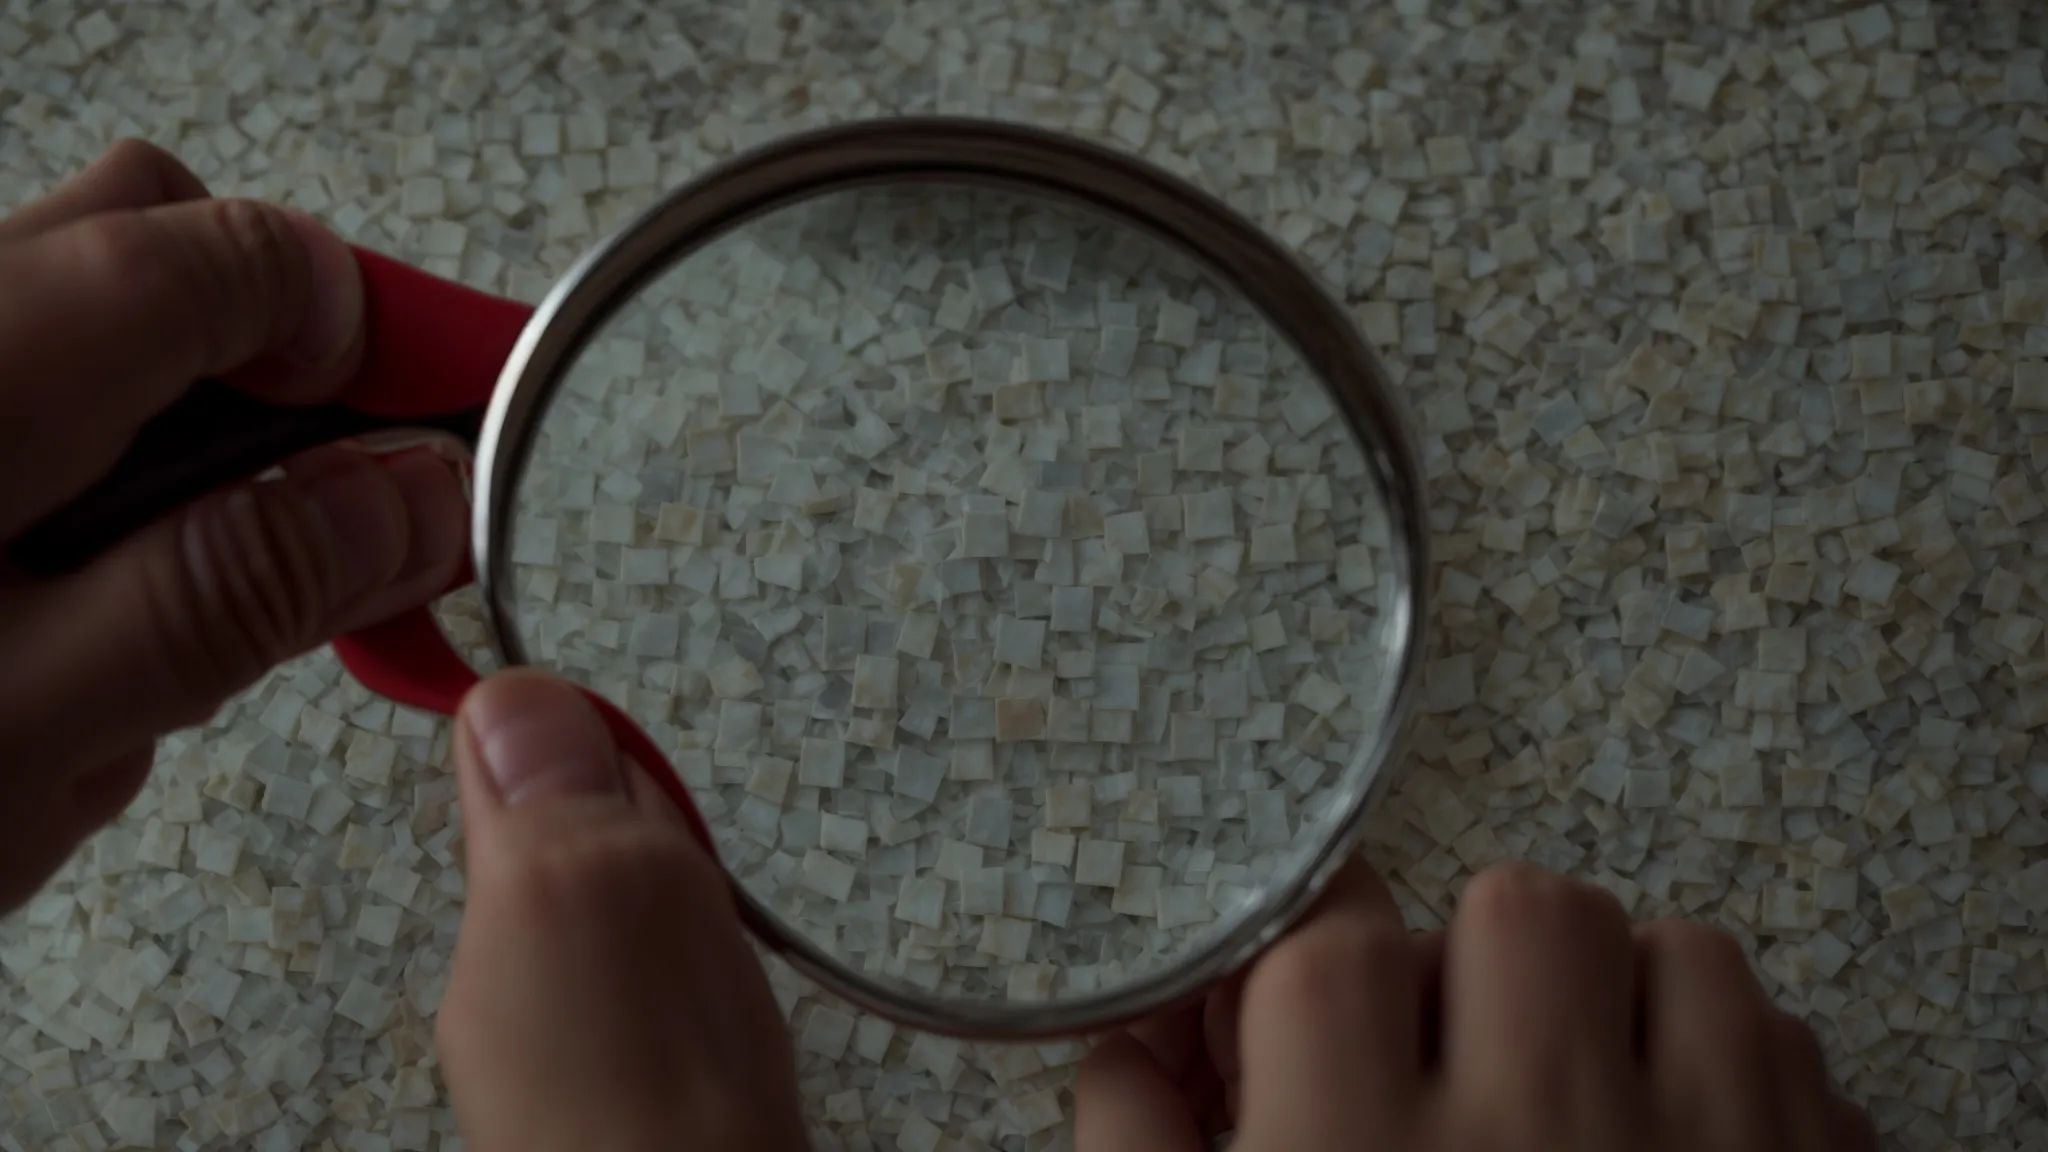 a person using a magnifying glass to examine a jigsaw puzzle of words related to seo and online search.